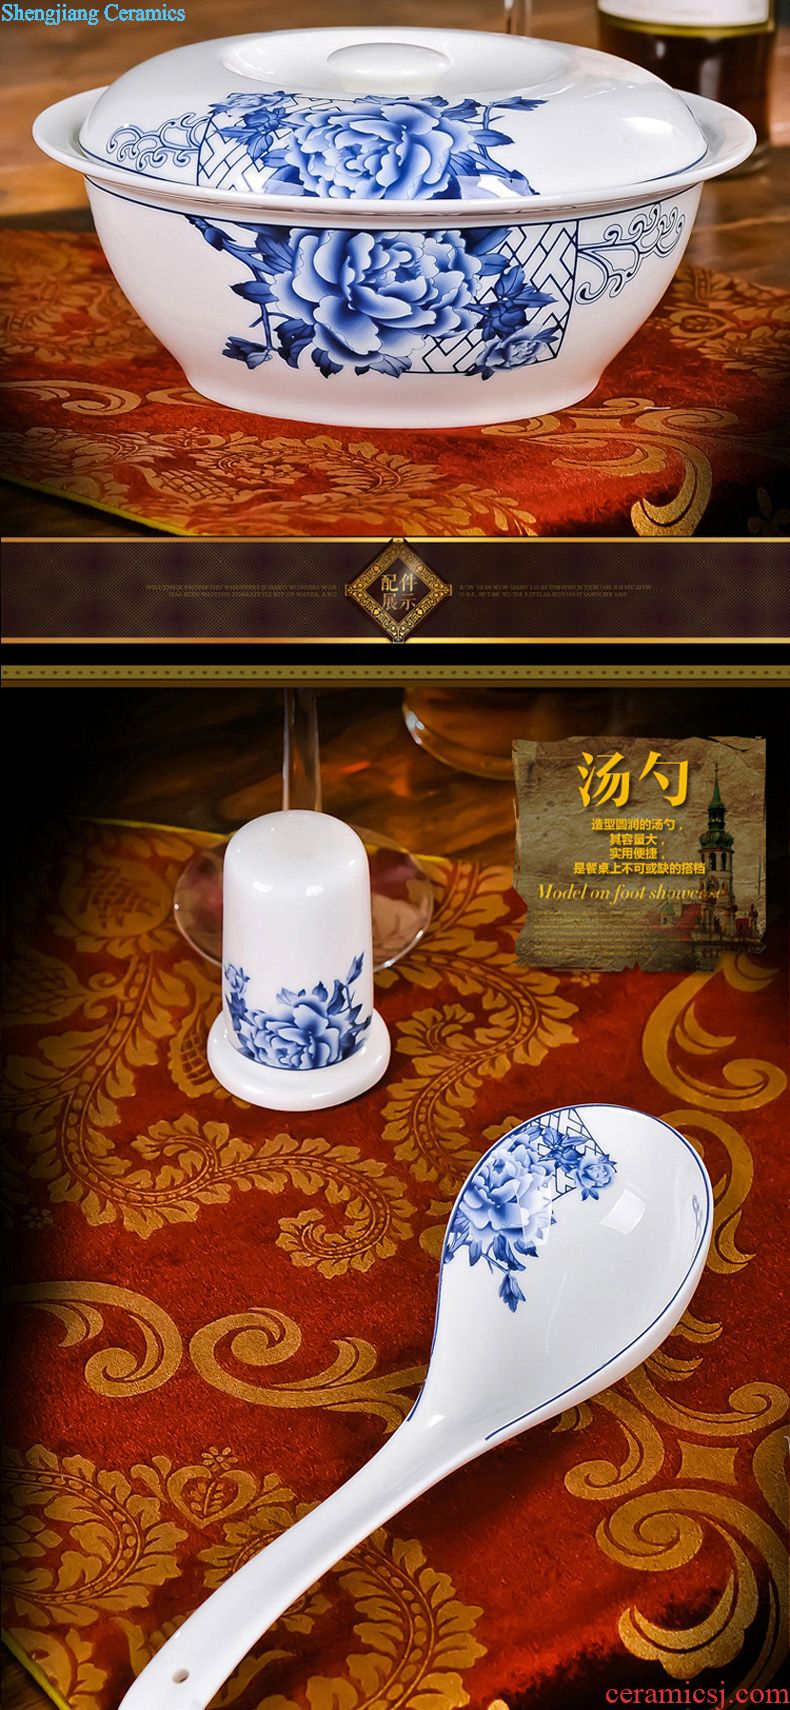 Jingdezhen ceramic bone China tableware suit Chinese style phnom penh home dishes suit high-end gift porcelain plate